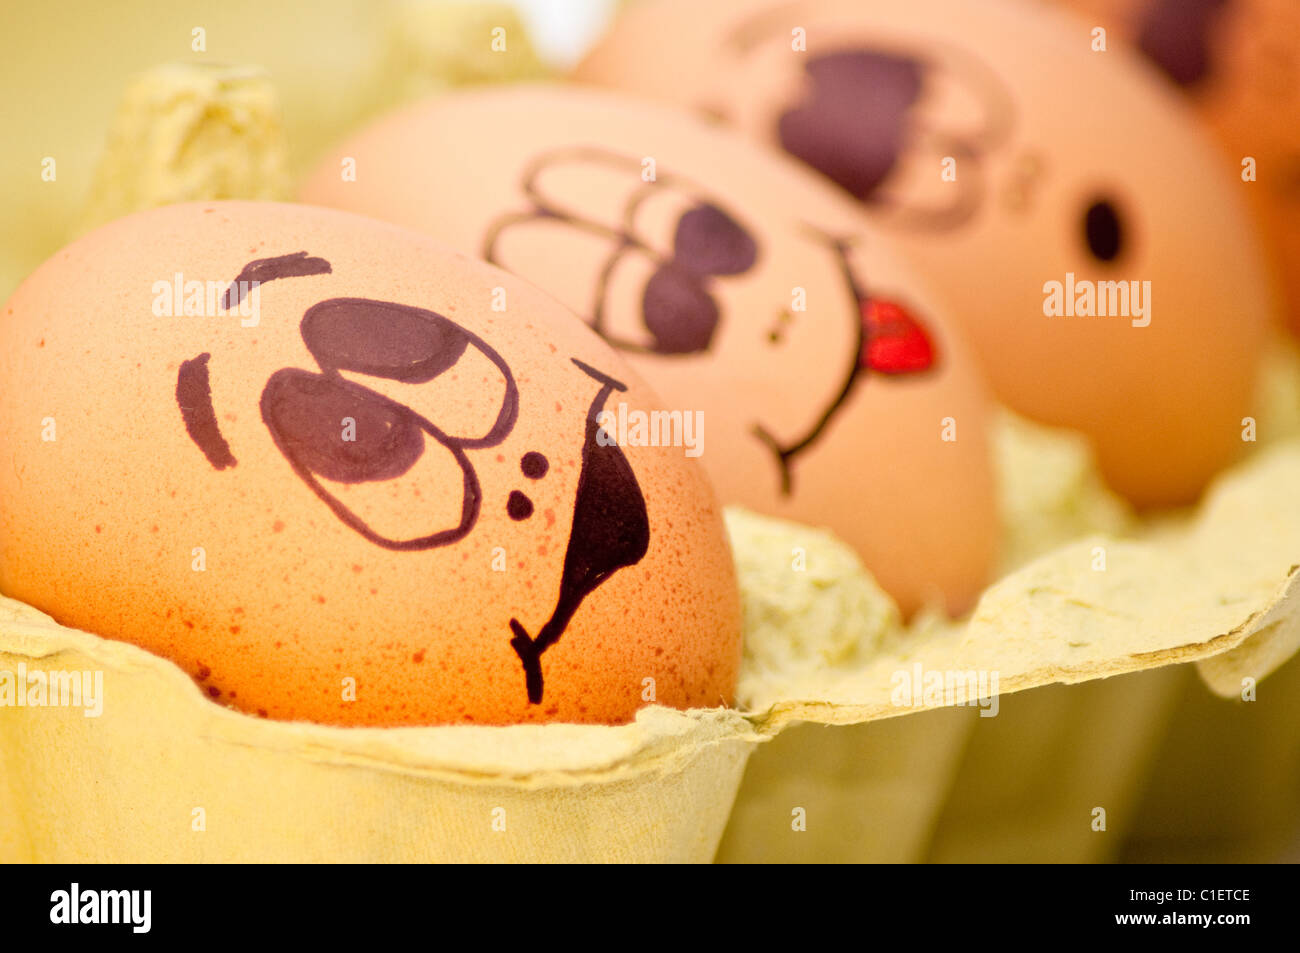 Group of fresh eggs with drawn faces depicting various emotions arranged in a cardboard egg carton against white. Stock Photo